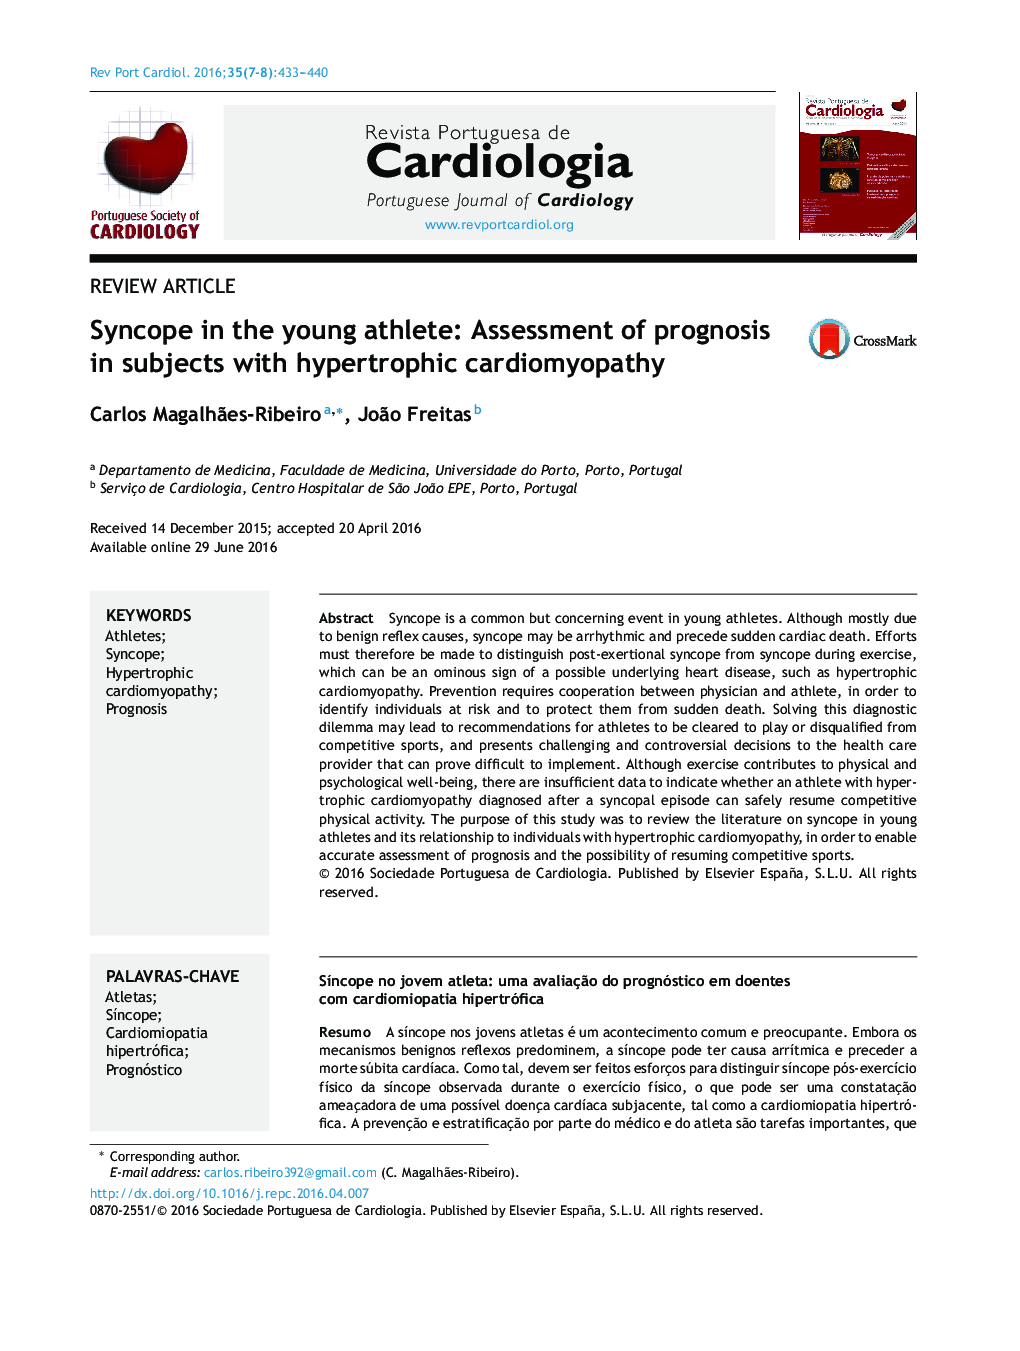 Syncope in the young athlete: Assessment of prognosis in subjects with hypertrophic cardiomyopathy